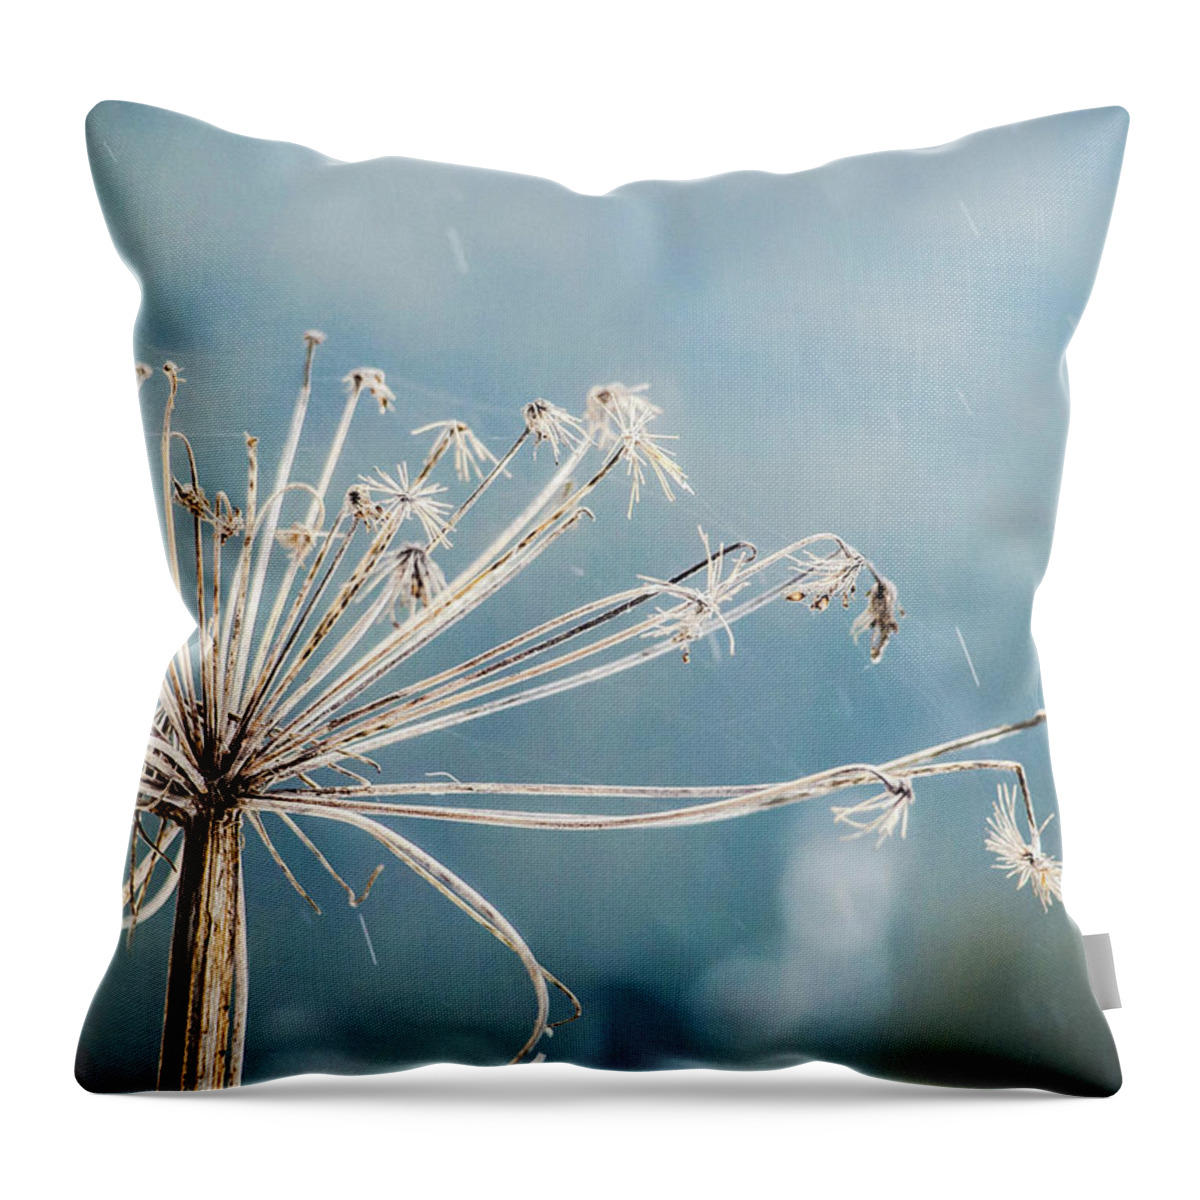 Bulgaria Throw Pillow featuring the photograph Rain Old Flower by Photograpy Is A Play With Light